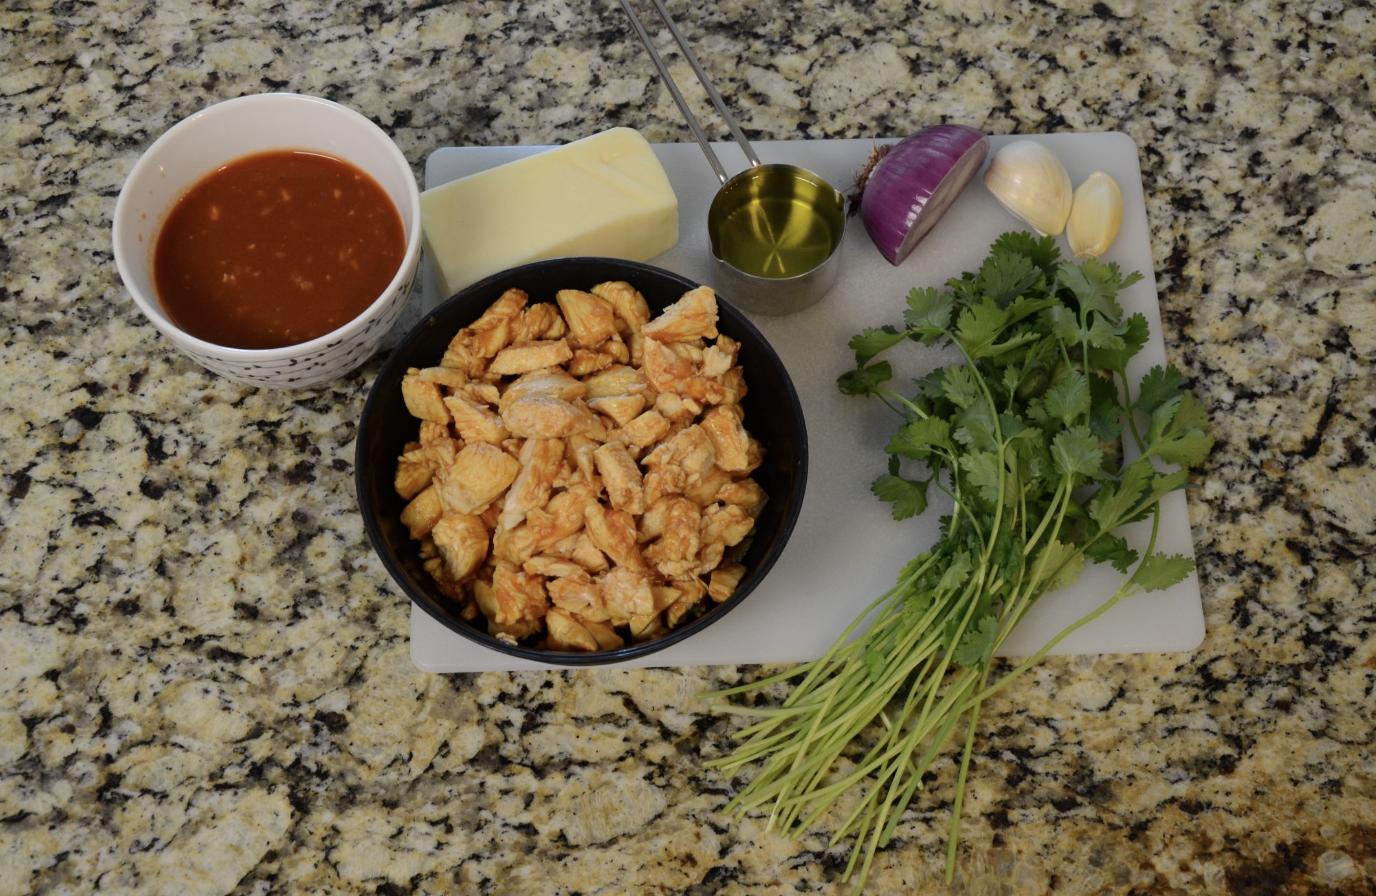 Ingredients for healthy bbq pizza